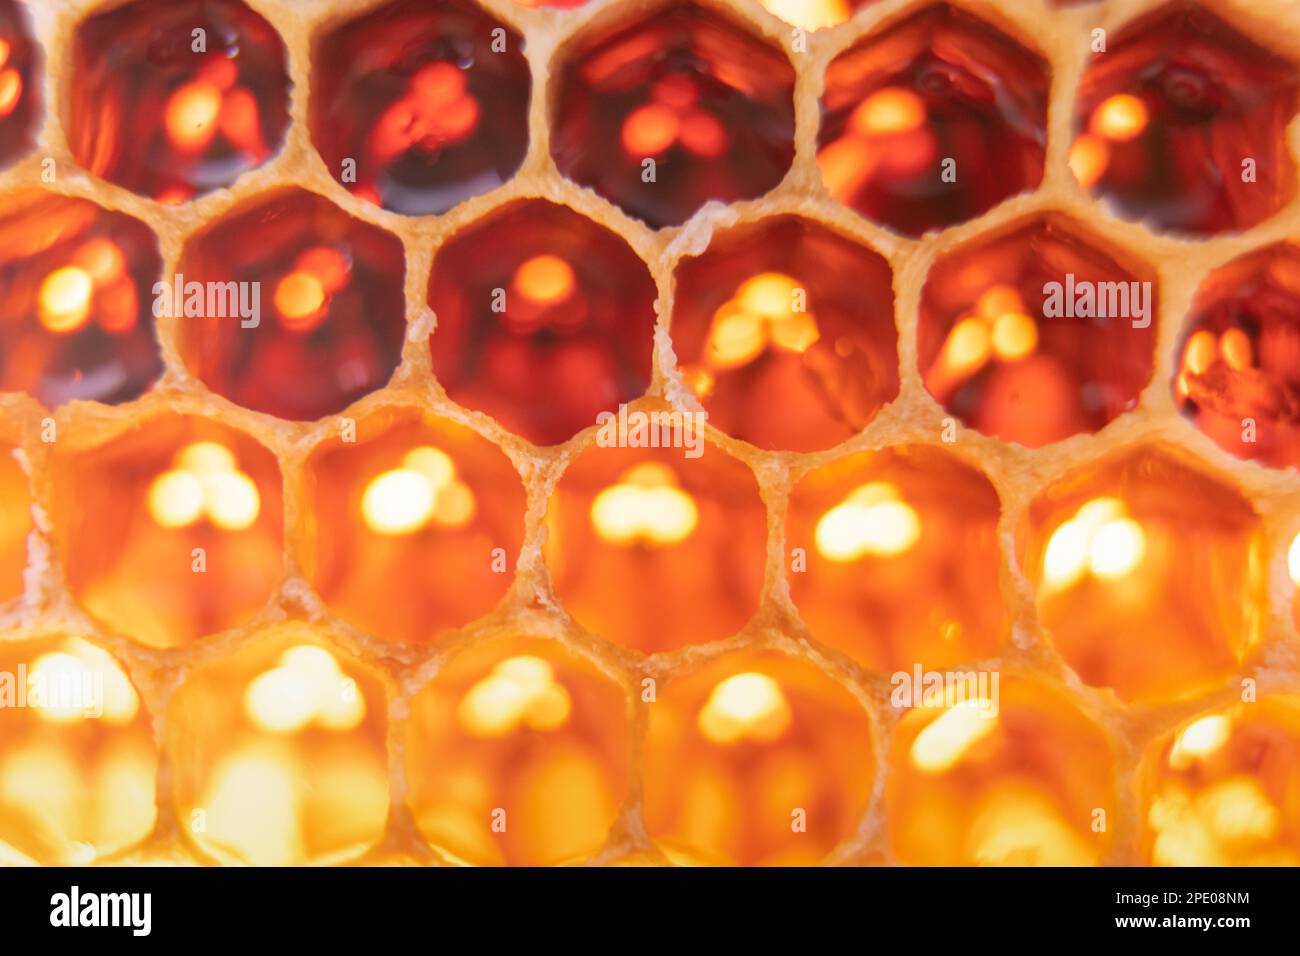 Close-up of bee honeycombs of geometric hexagonal shapes full of tasty honey reflecting light. Beekeeping, apiculture, bee farming, background Stock Photo